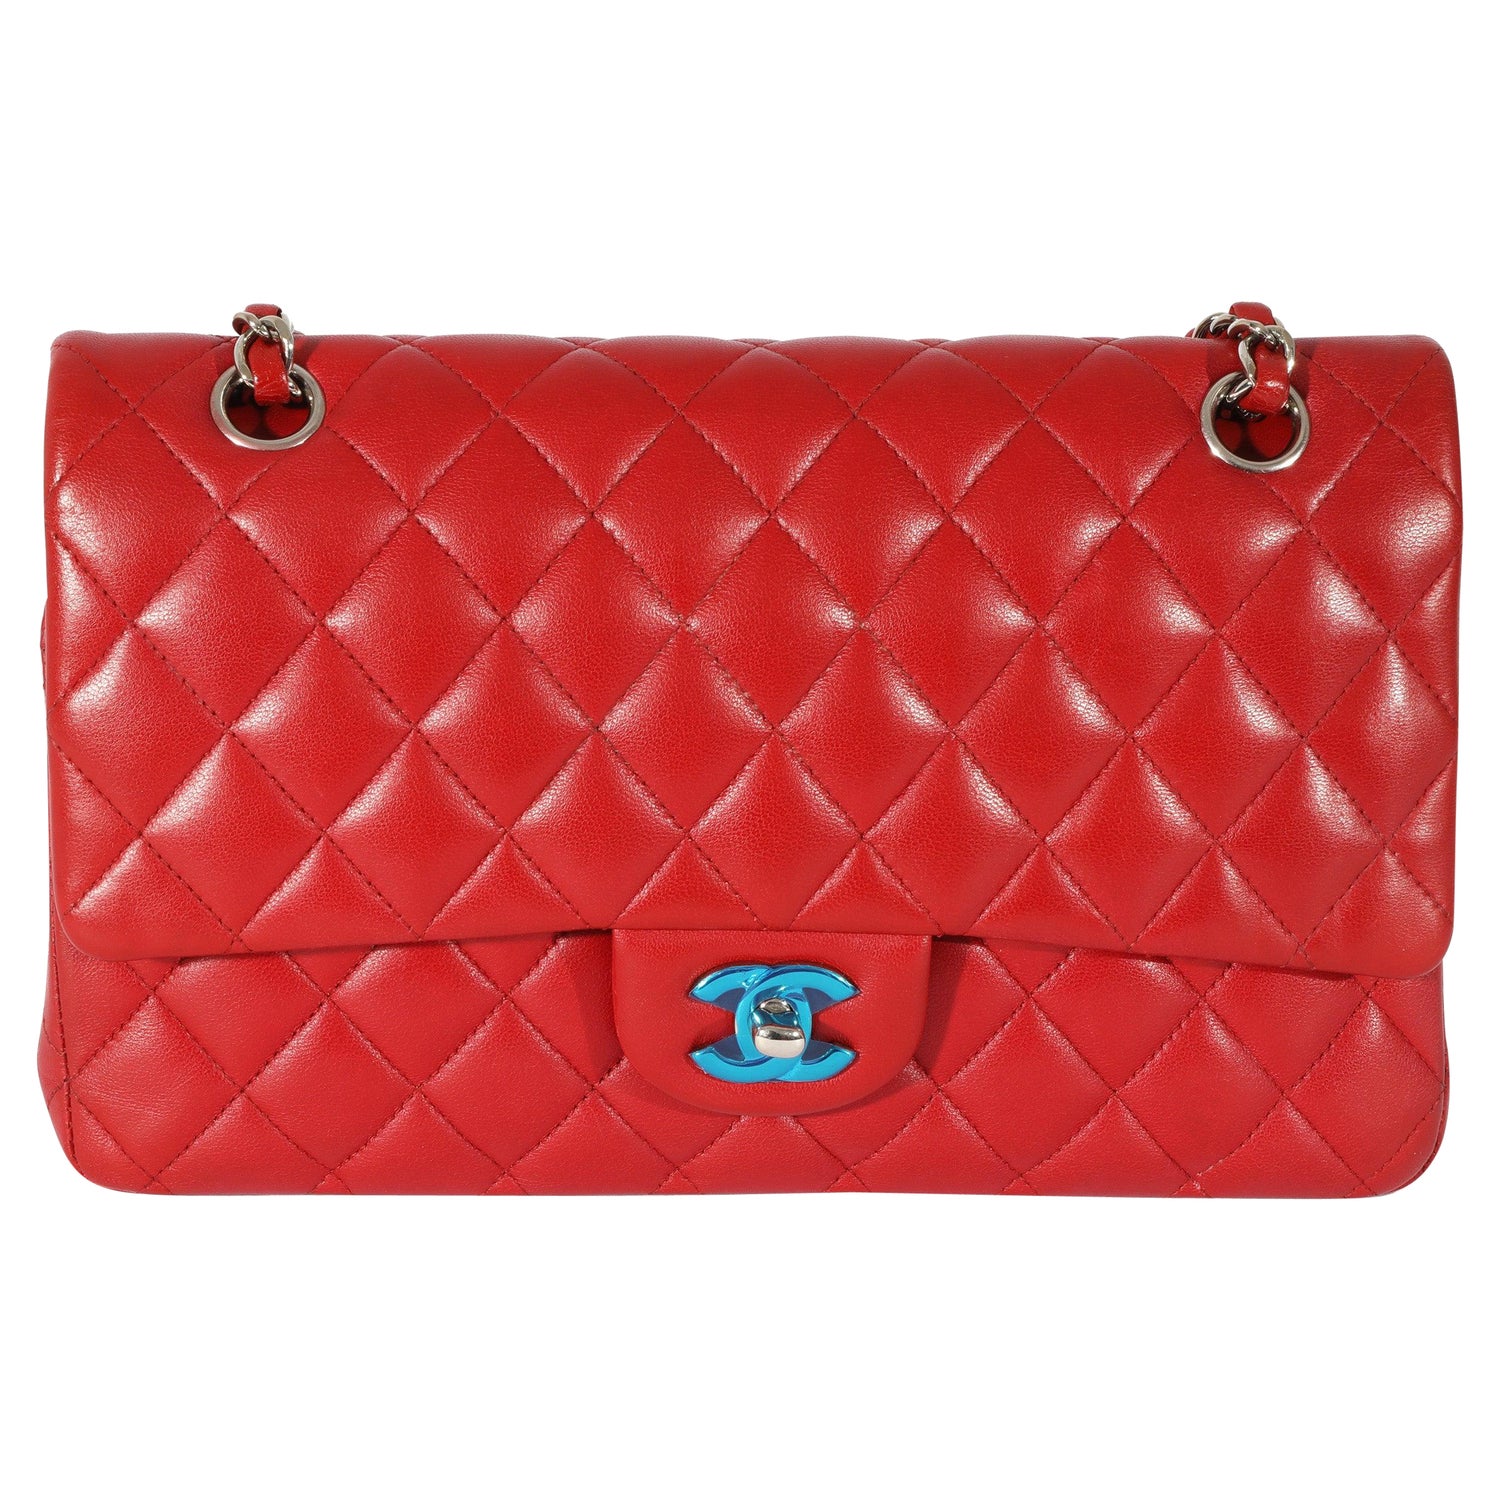 My Chanel Jumbo Flap Story & Advice for Buying Preowned 